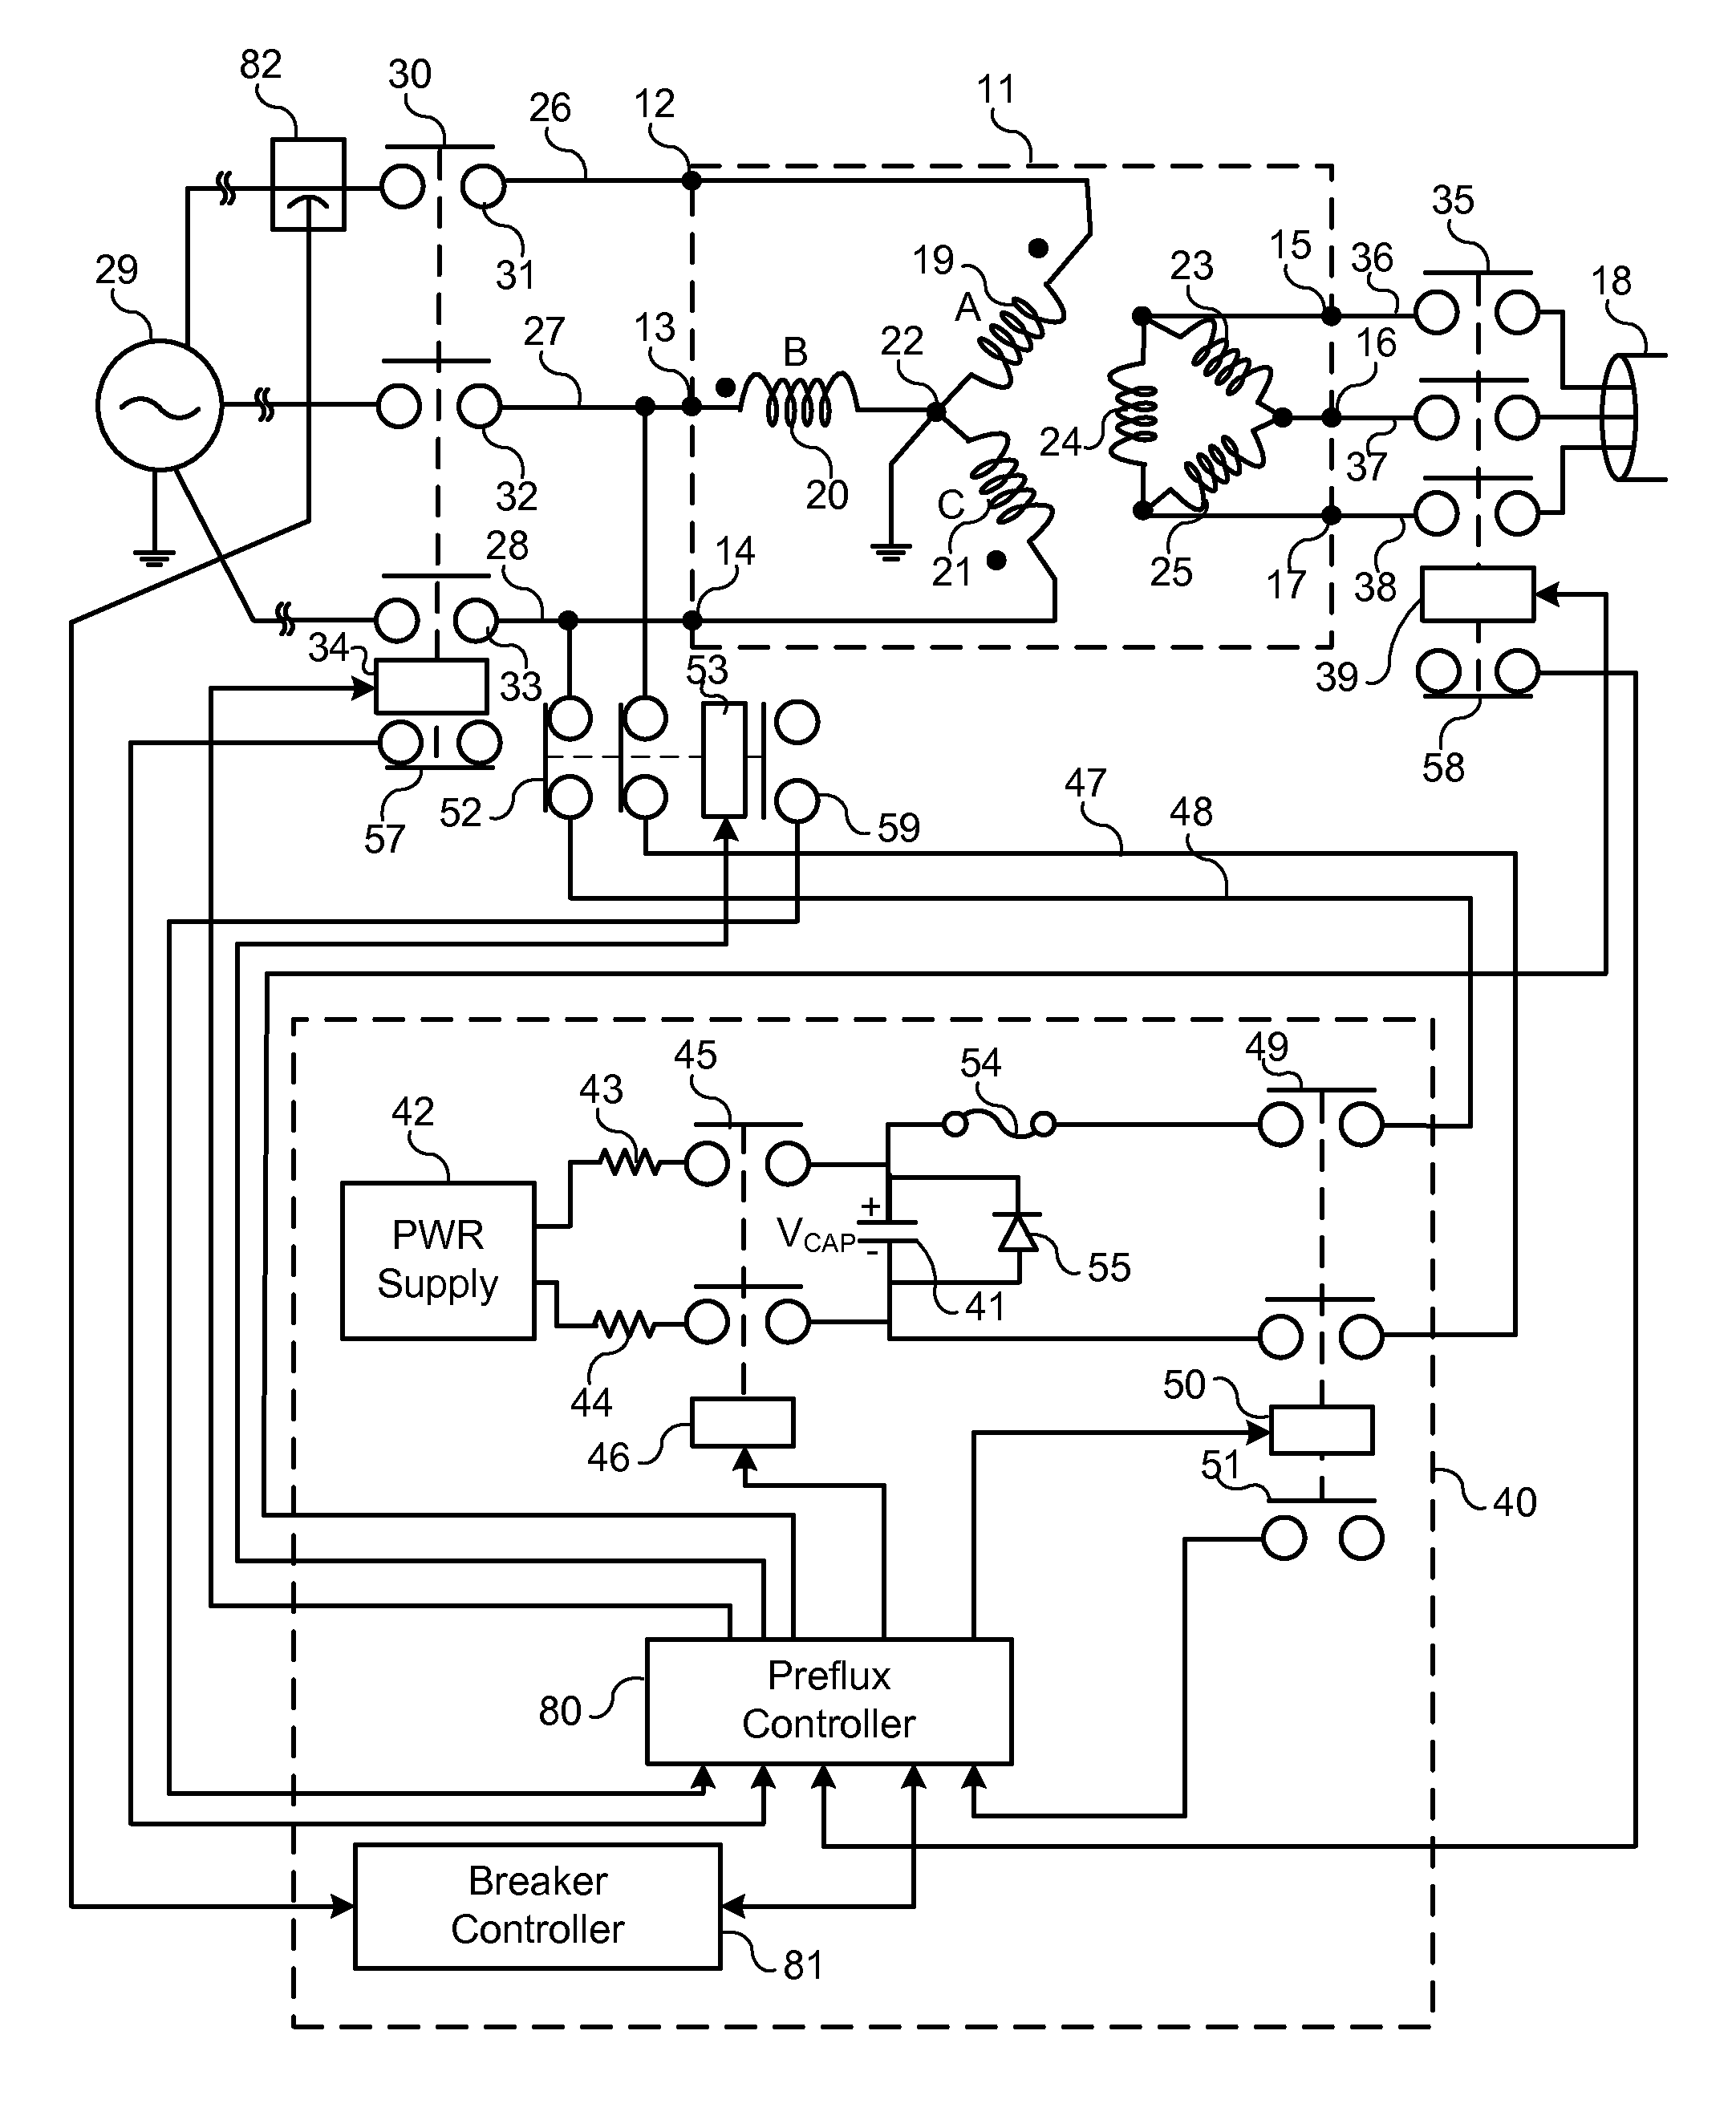 System, Apparatus, and Method for Reducing Inrush Current in a Three-Phase Transformer